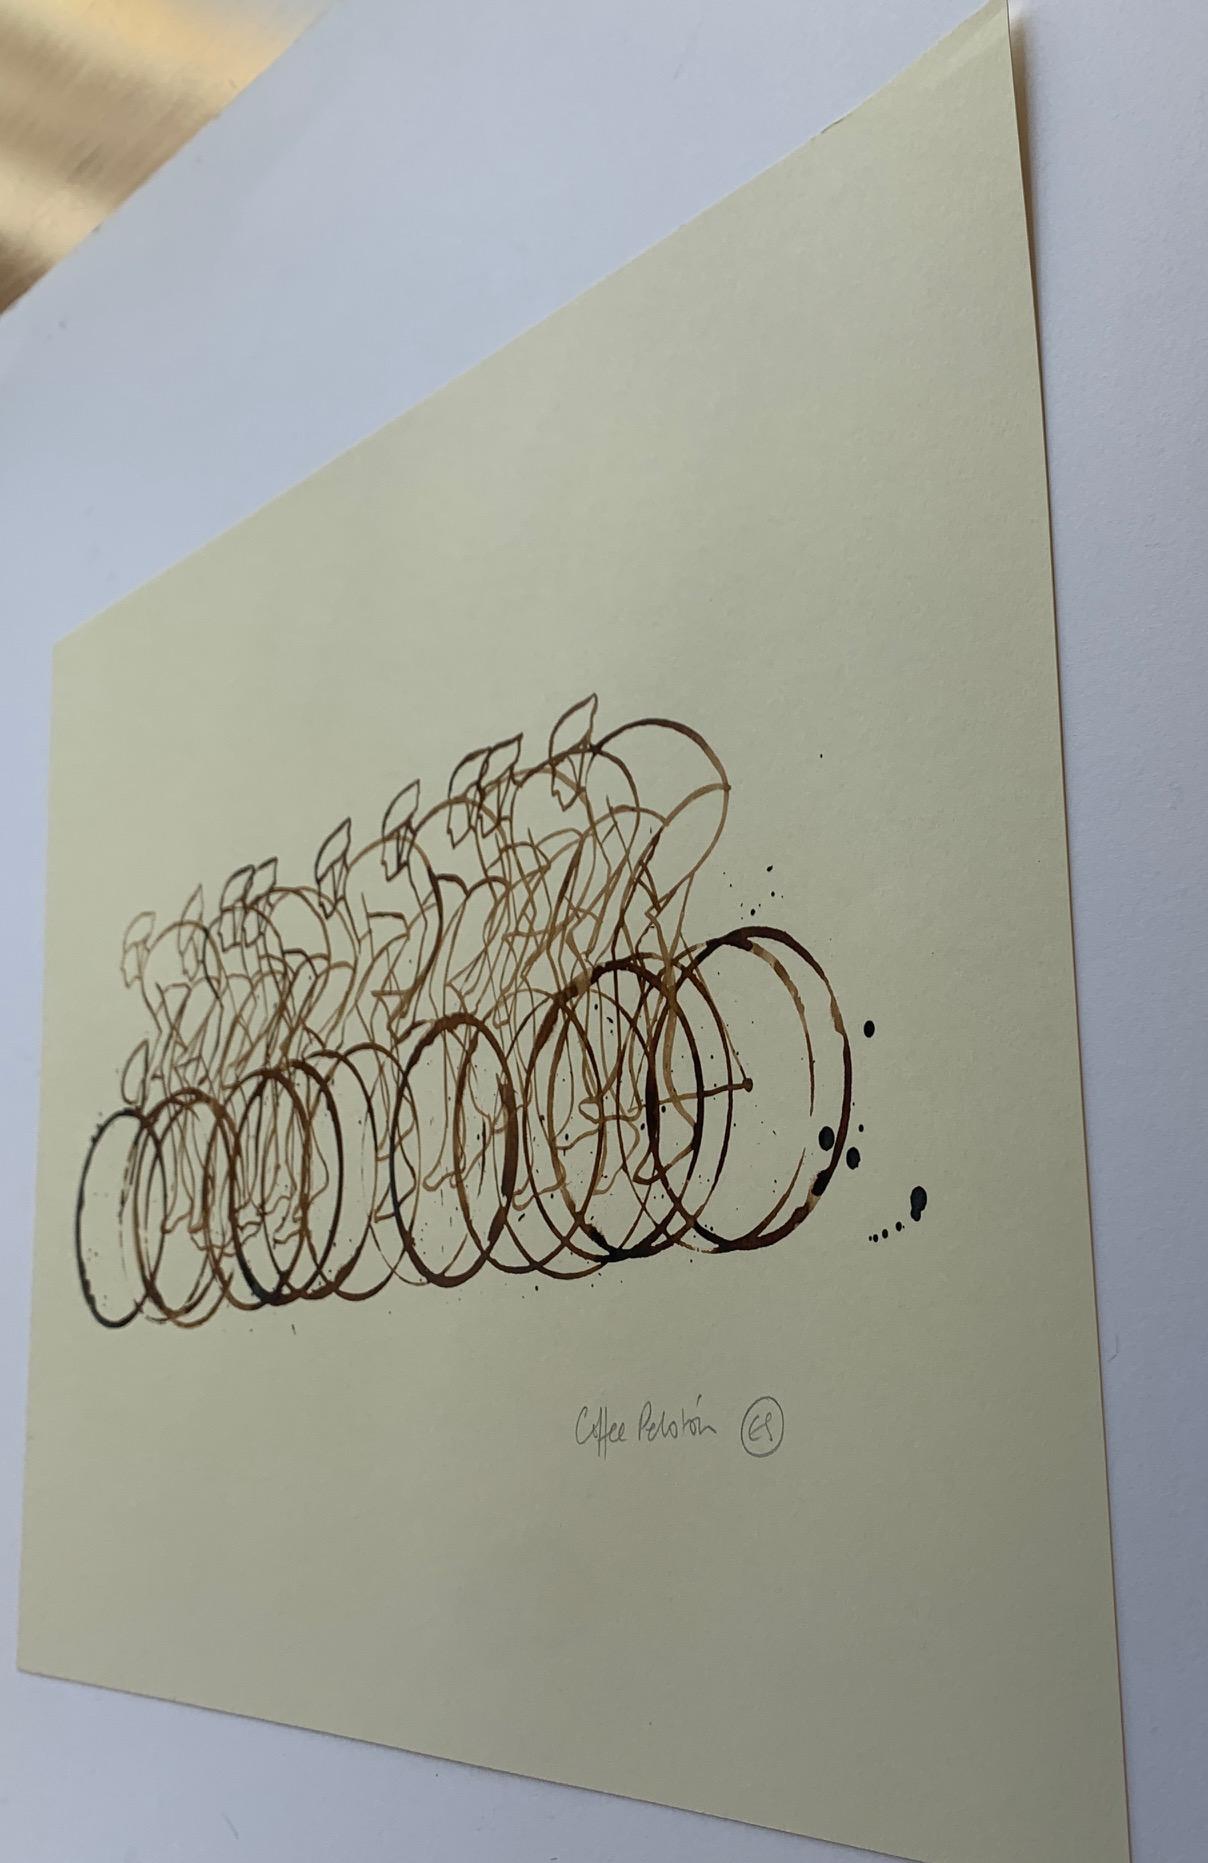 Original Artwork made from specially treated coffee and then submitted to a further setting treatment so the artwork will last.
Coffee Peloton Series IX is part of an ongoing series of work by artist and printamker Eliza Southwood. Each one from